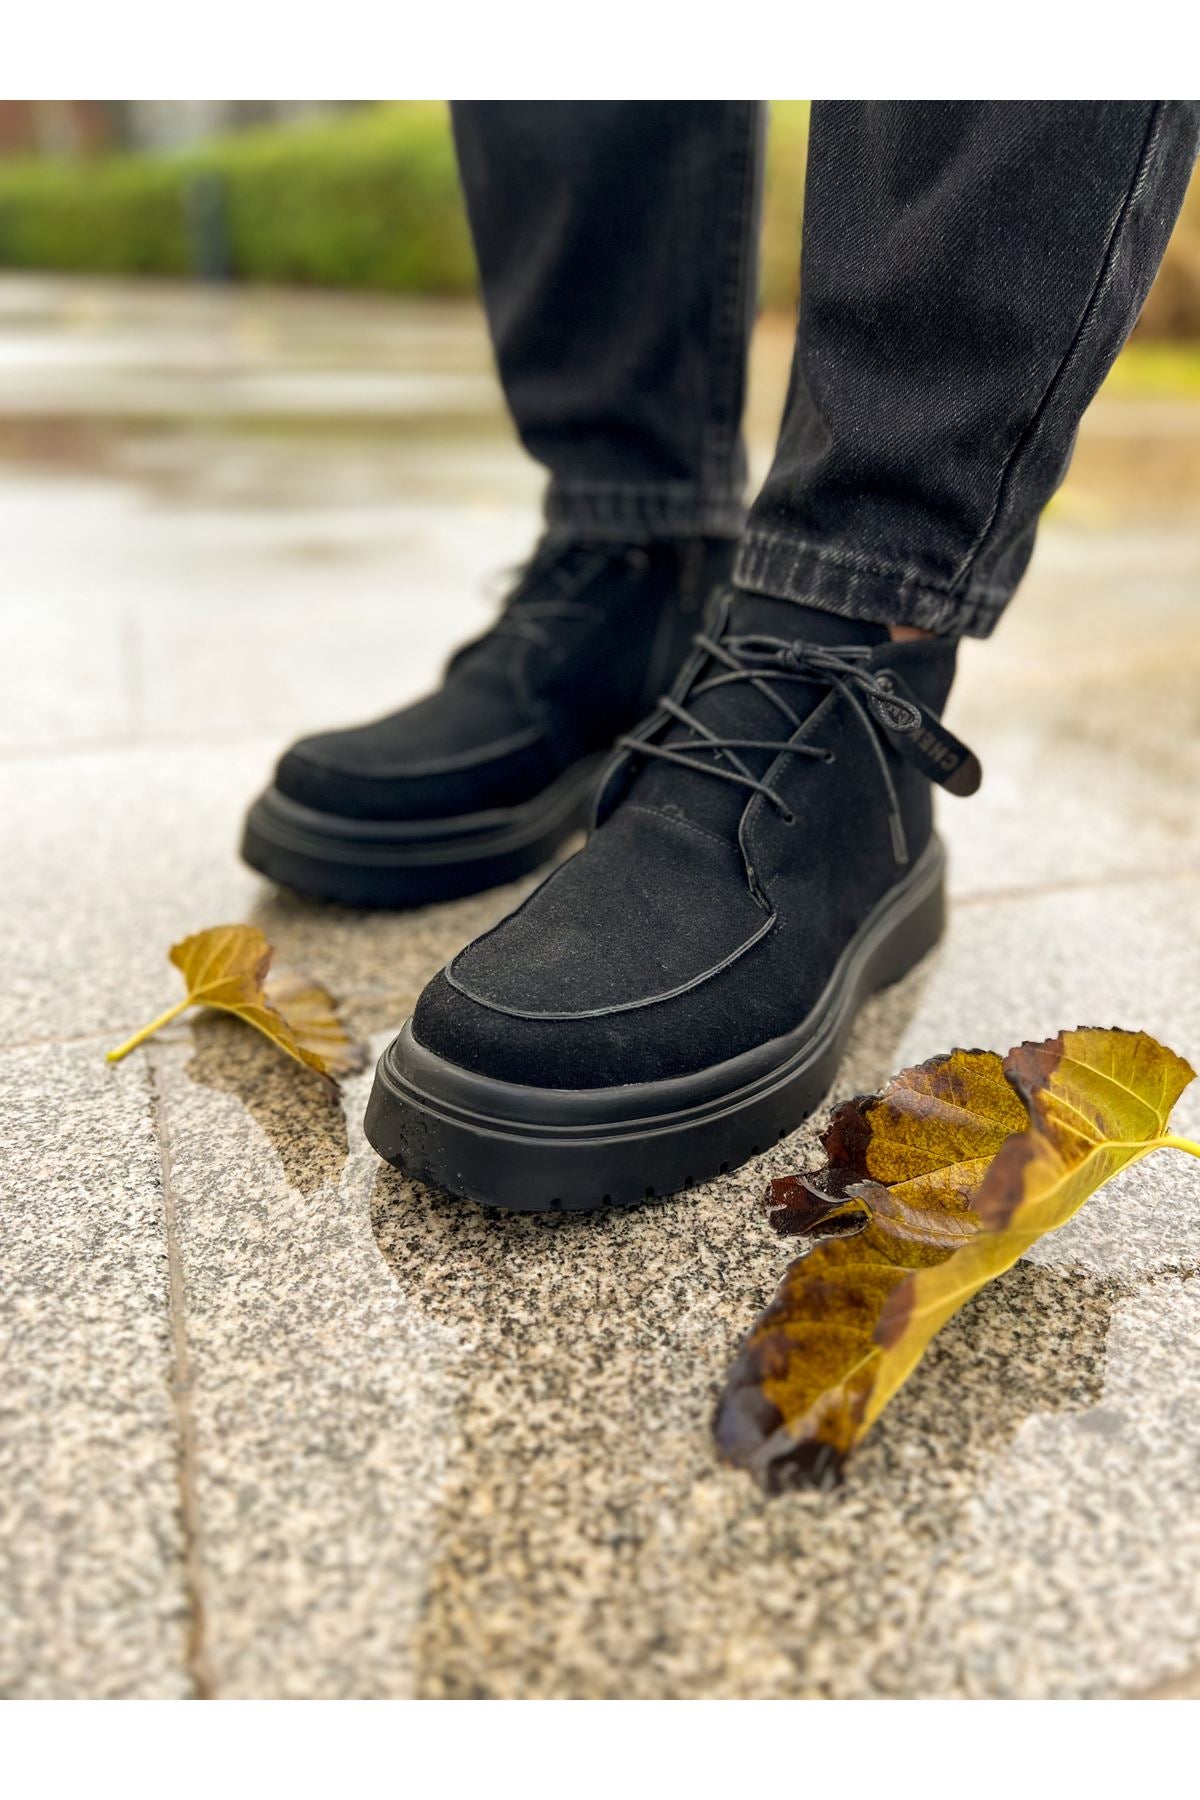 CH 213 Men's Boots BLACK Suede - STREETMODE™